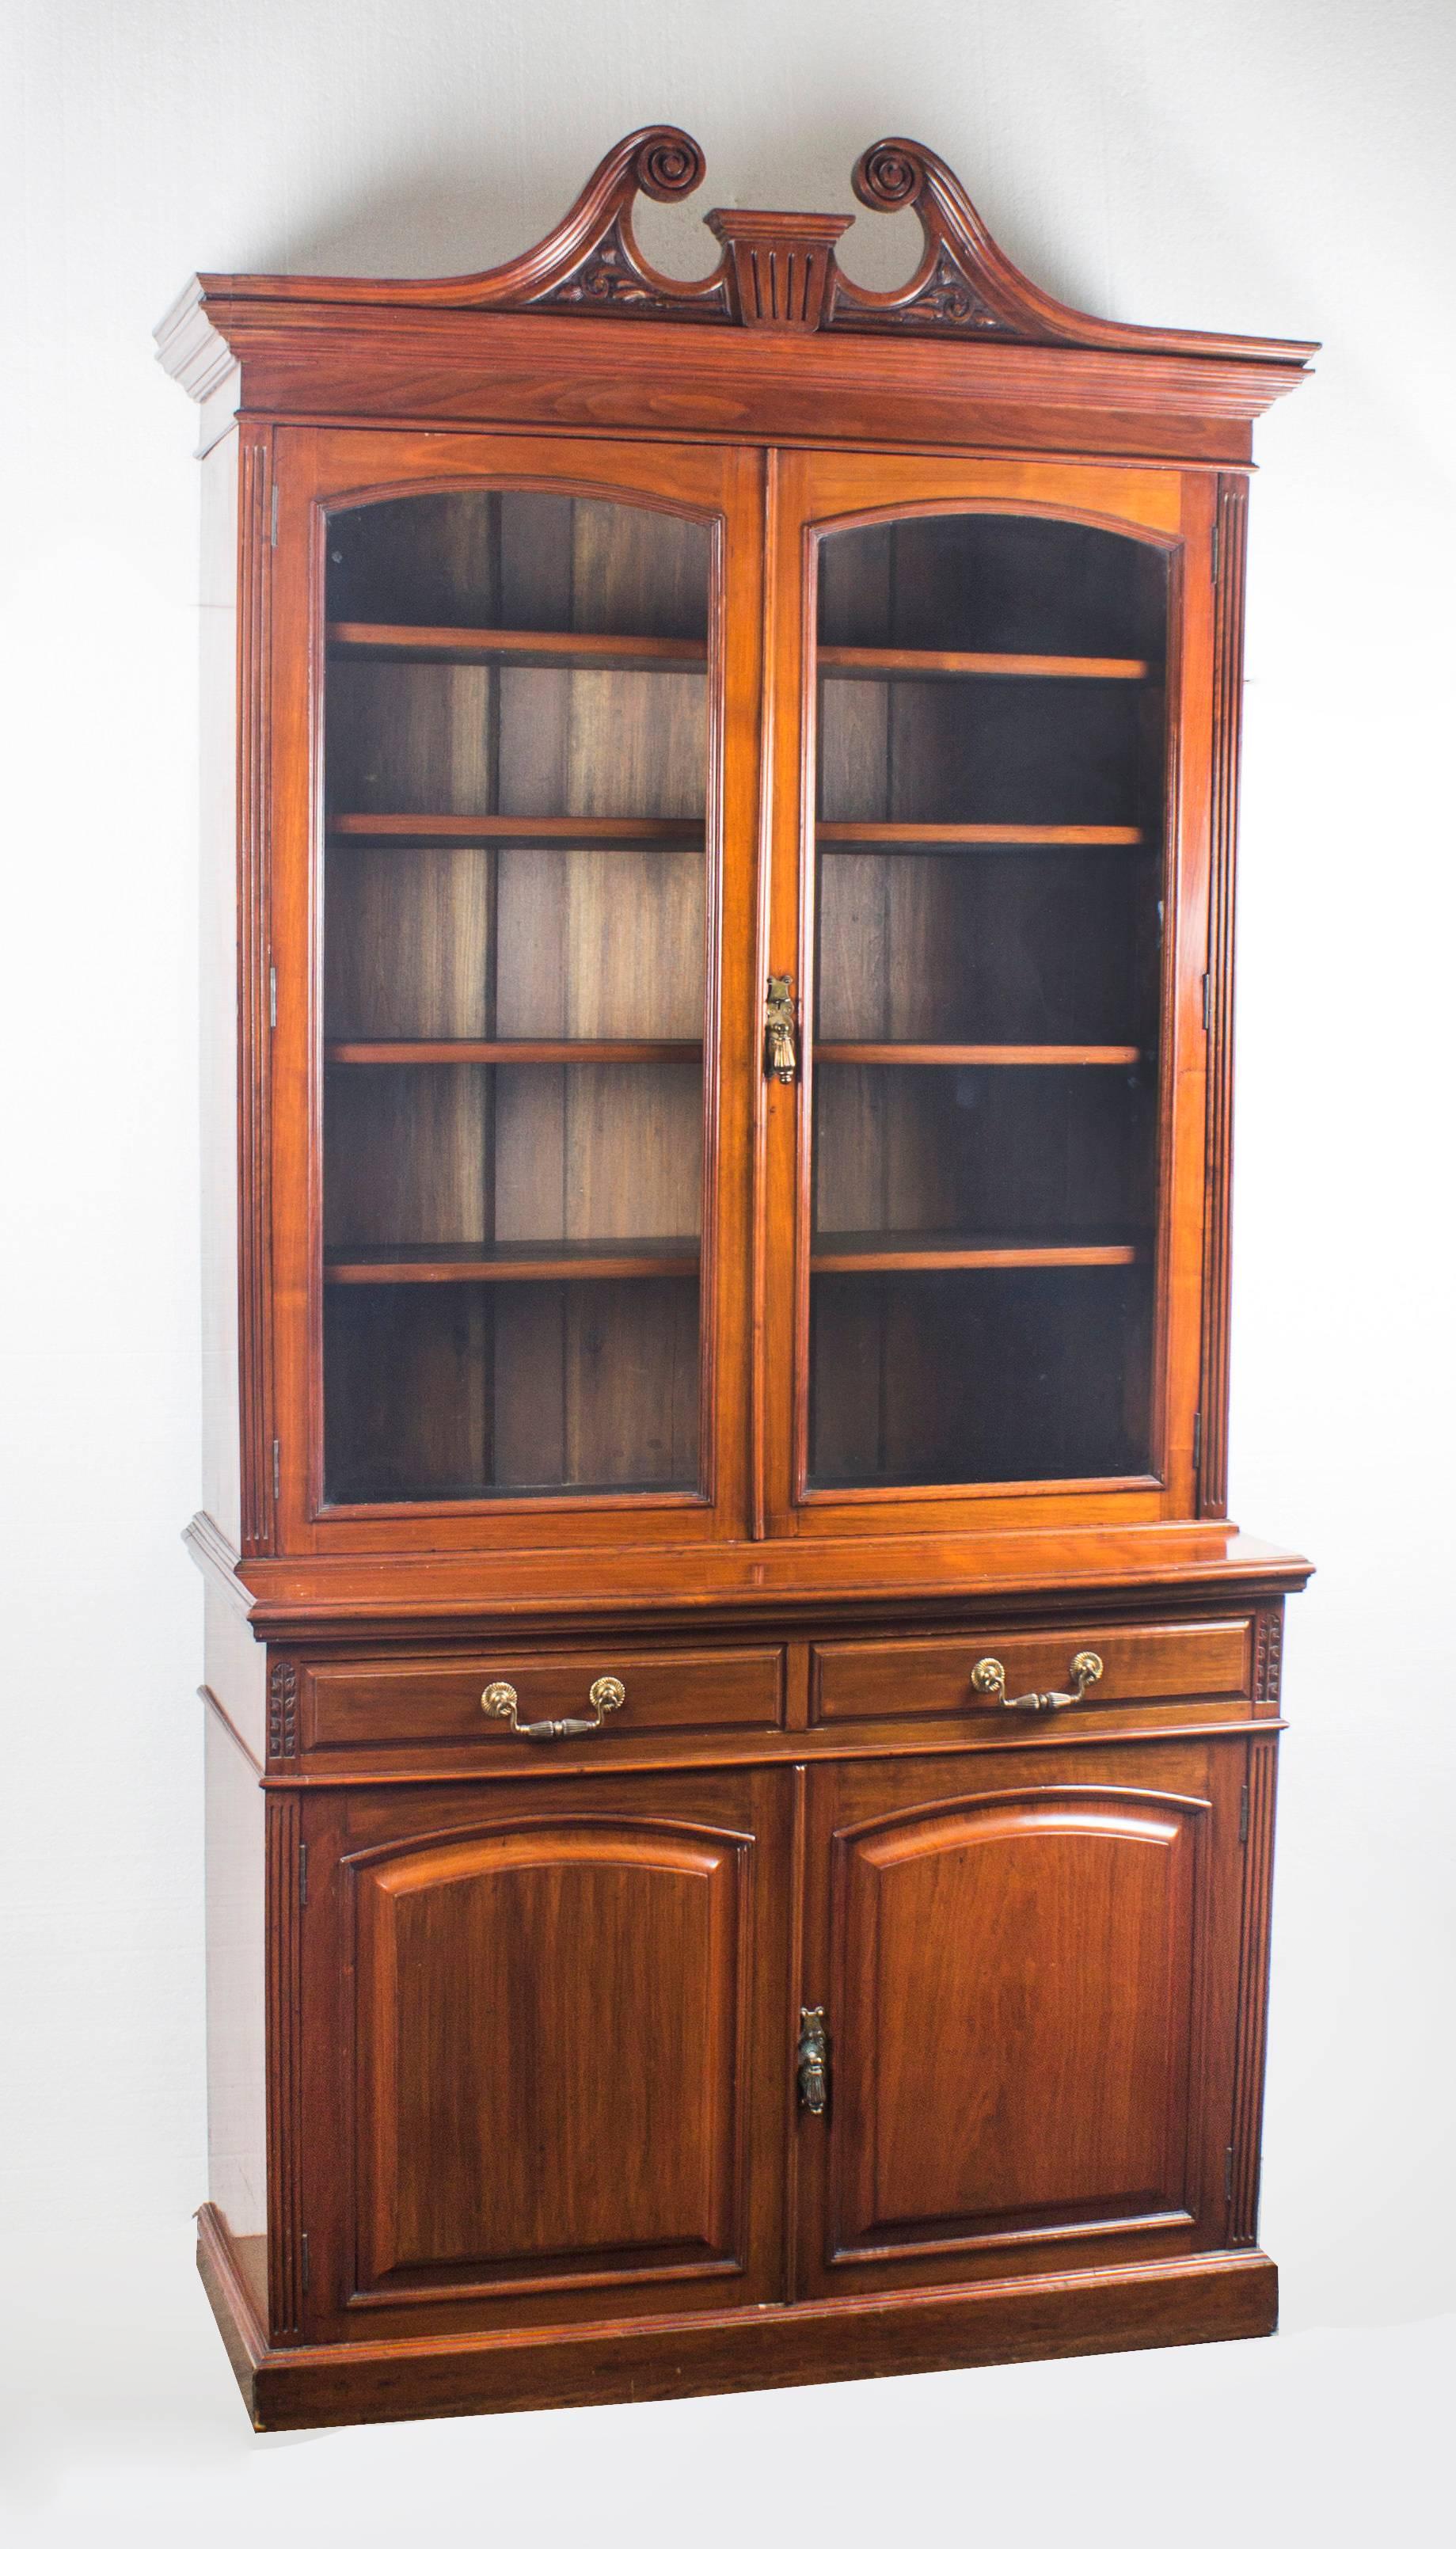 This is an absolutely stunning Edwardian walnut bookcase, circa 1890 in date.

This bookcase features a rich and striking grain, and has been accomplished in solid walnut, a very attractive and highly desirable wood. It has a beautiful swan neck